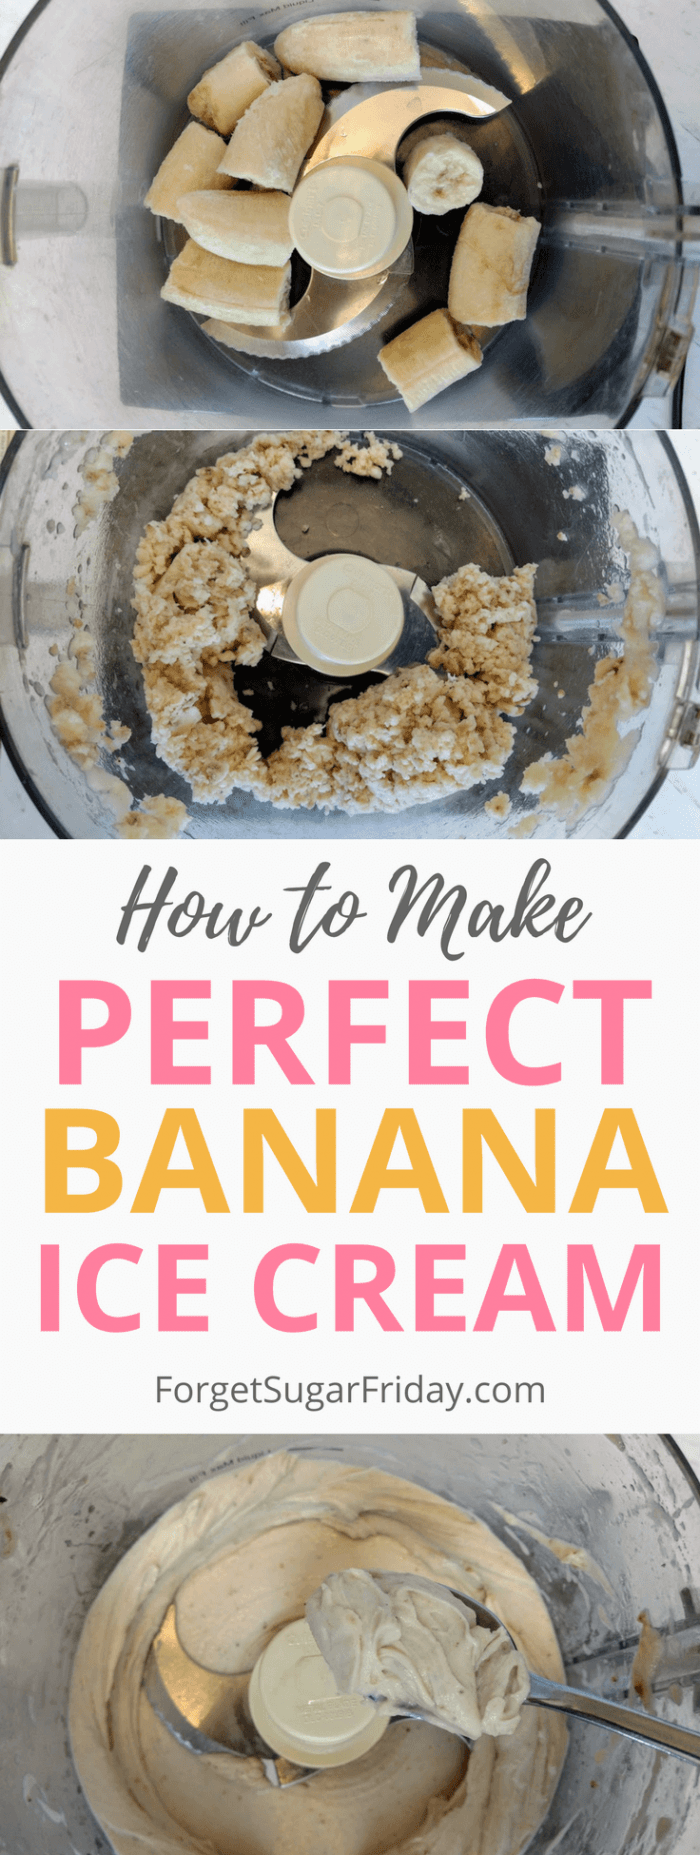 Learn the secrets to making perfect banana ice cream! Banana ice cream is an awesome sugar-free, dairy-free dessert. You'll love it!